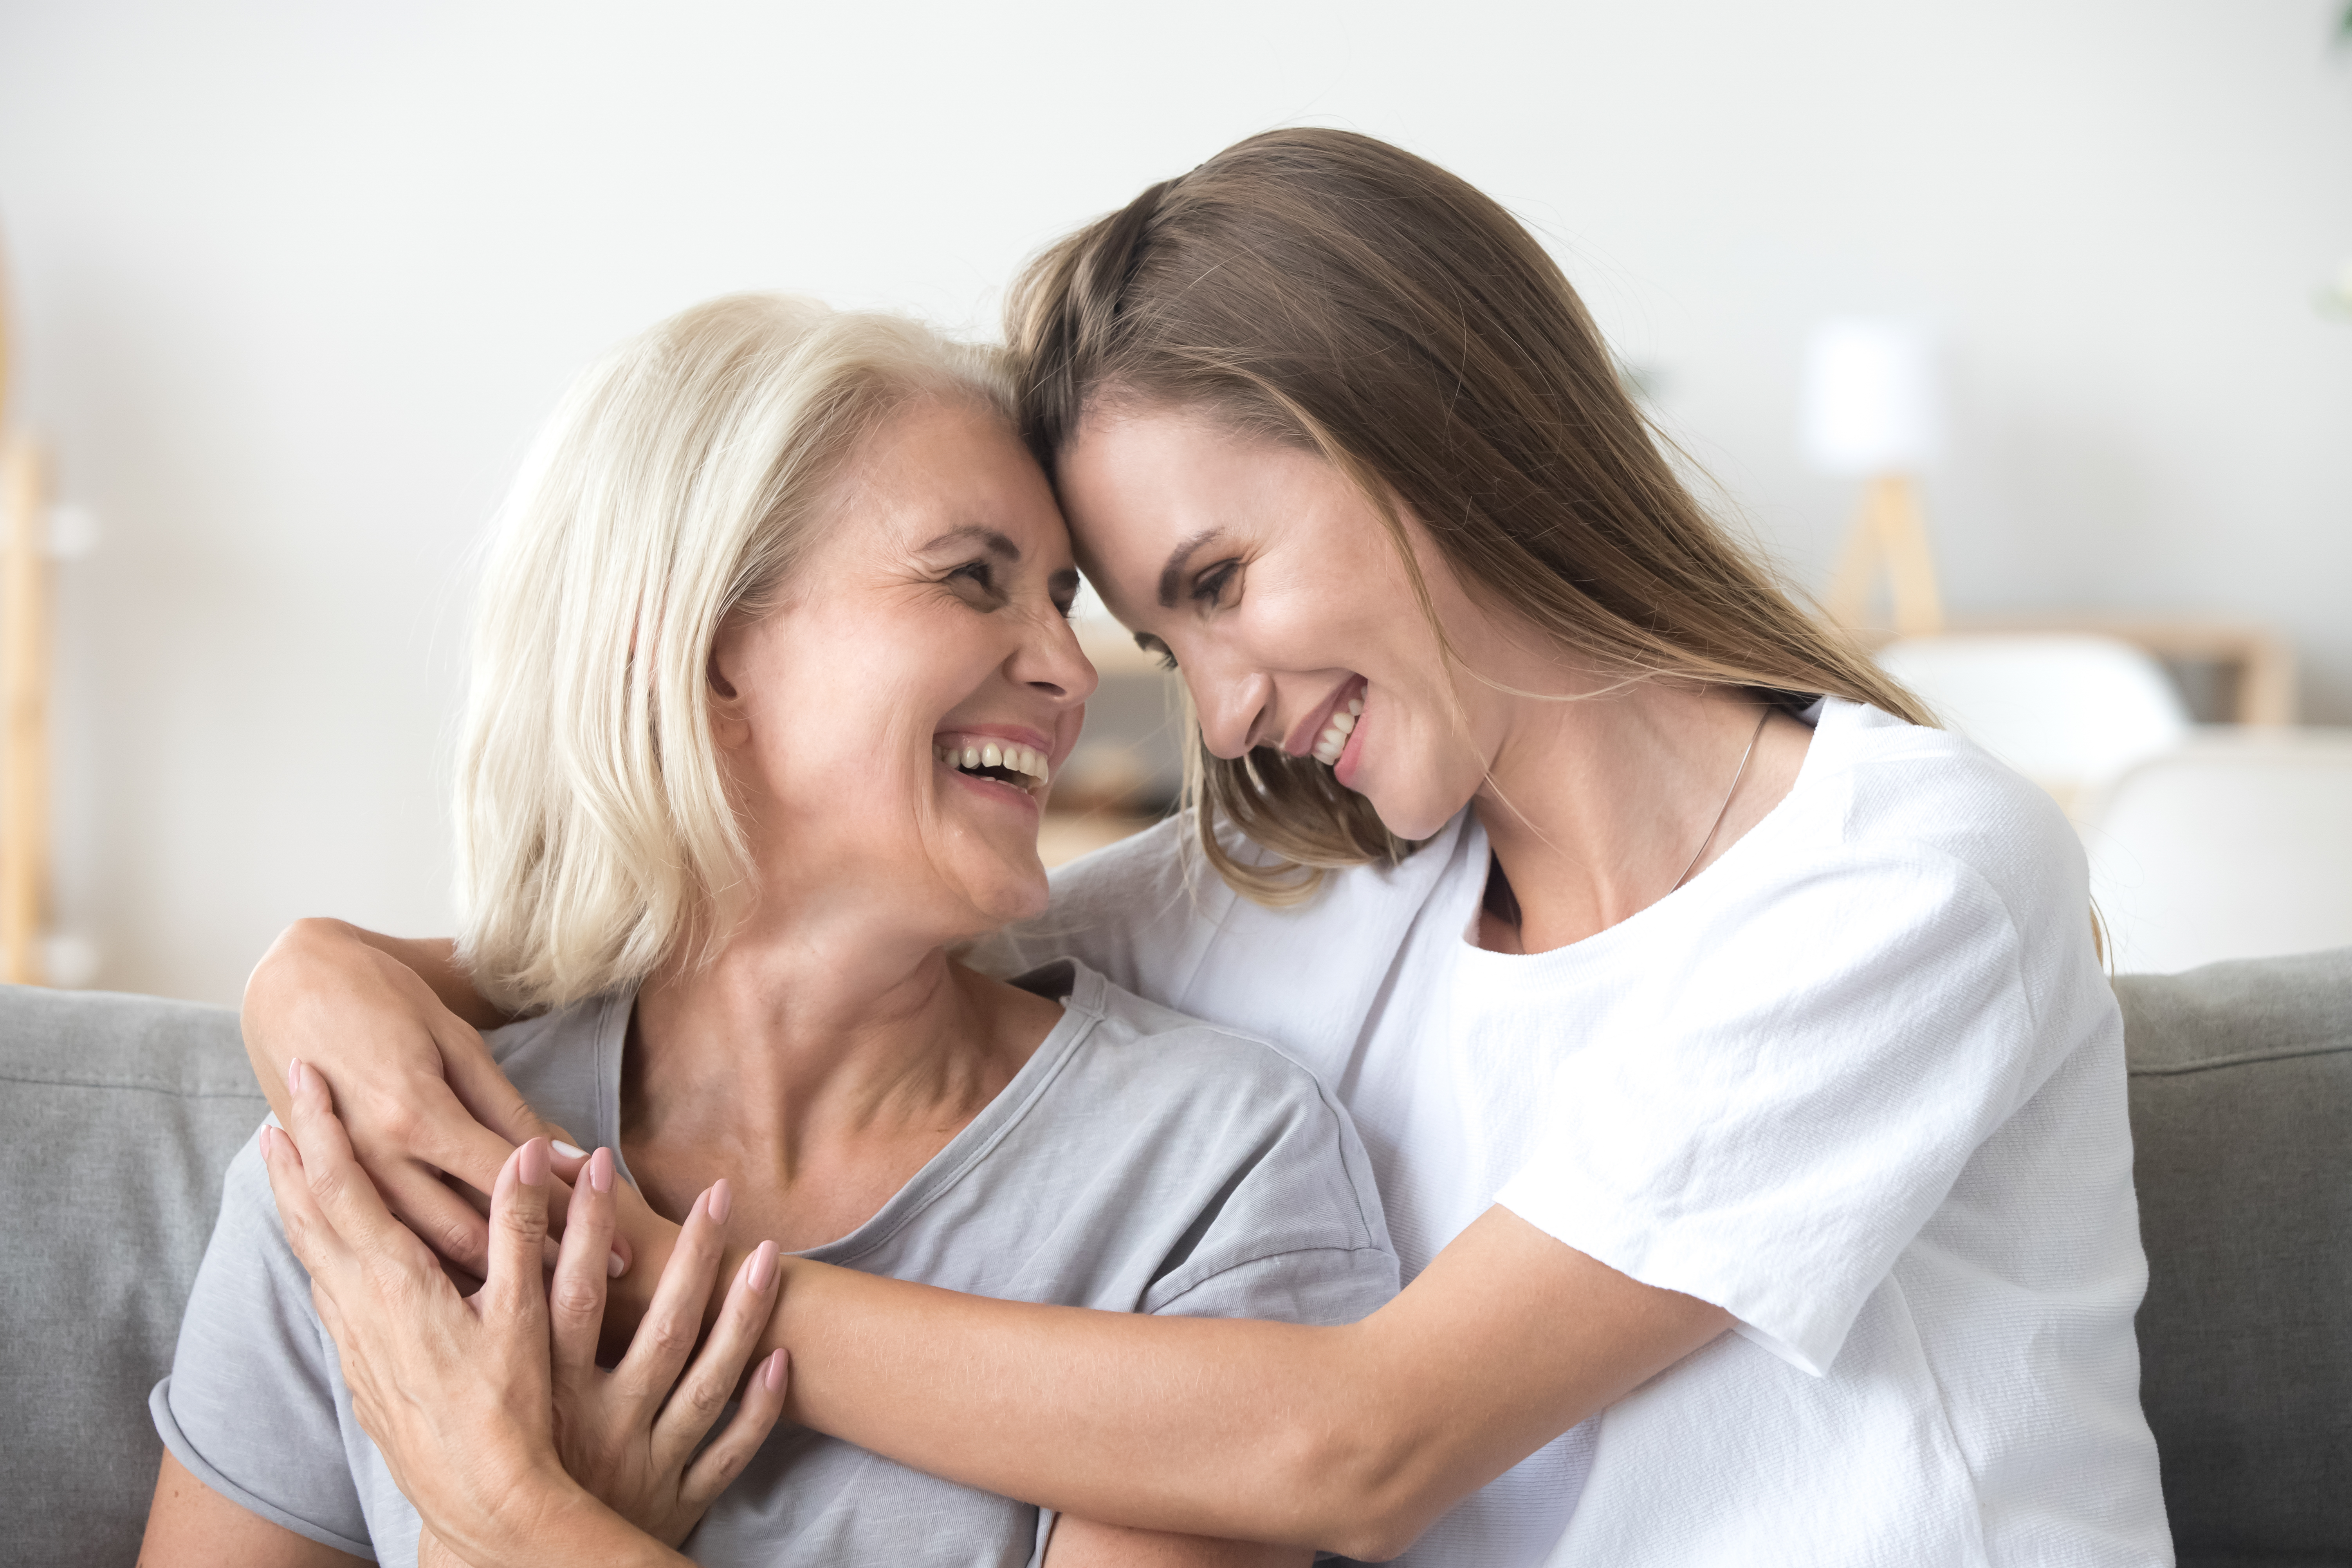 An older woman and a younger woman hud each other and laugh | Source: Shutterstock